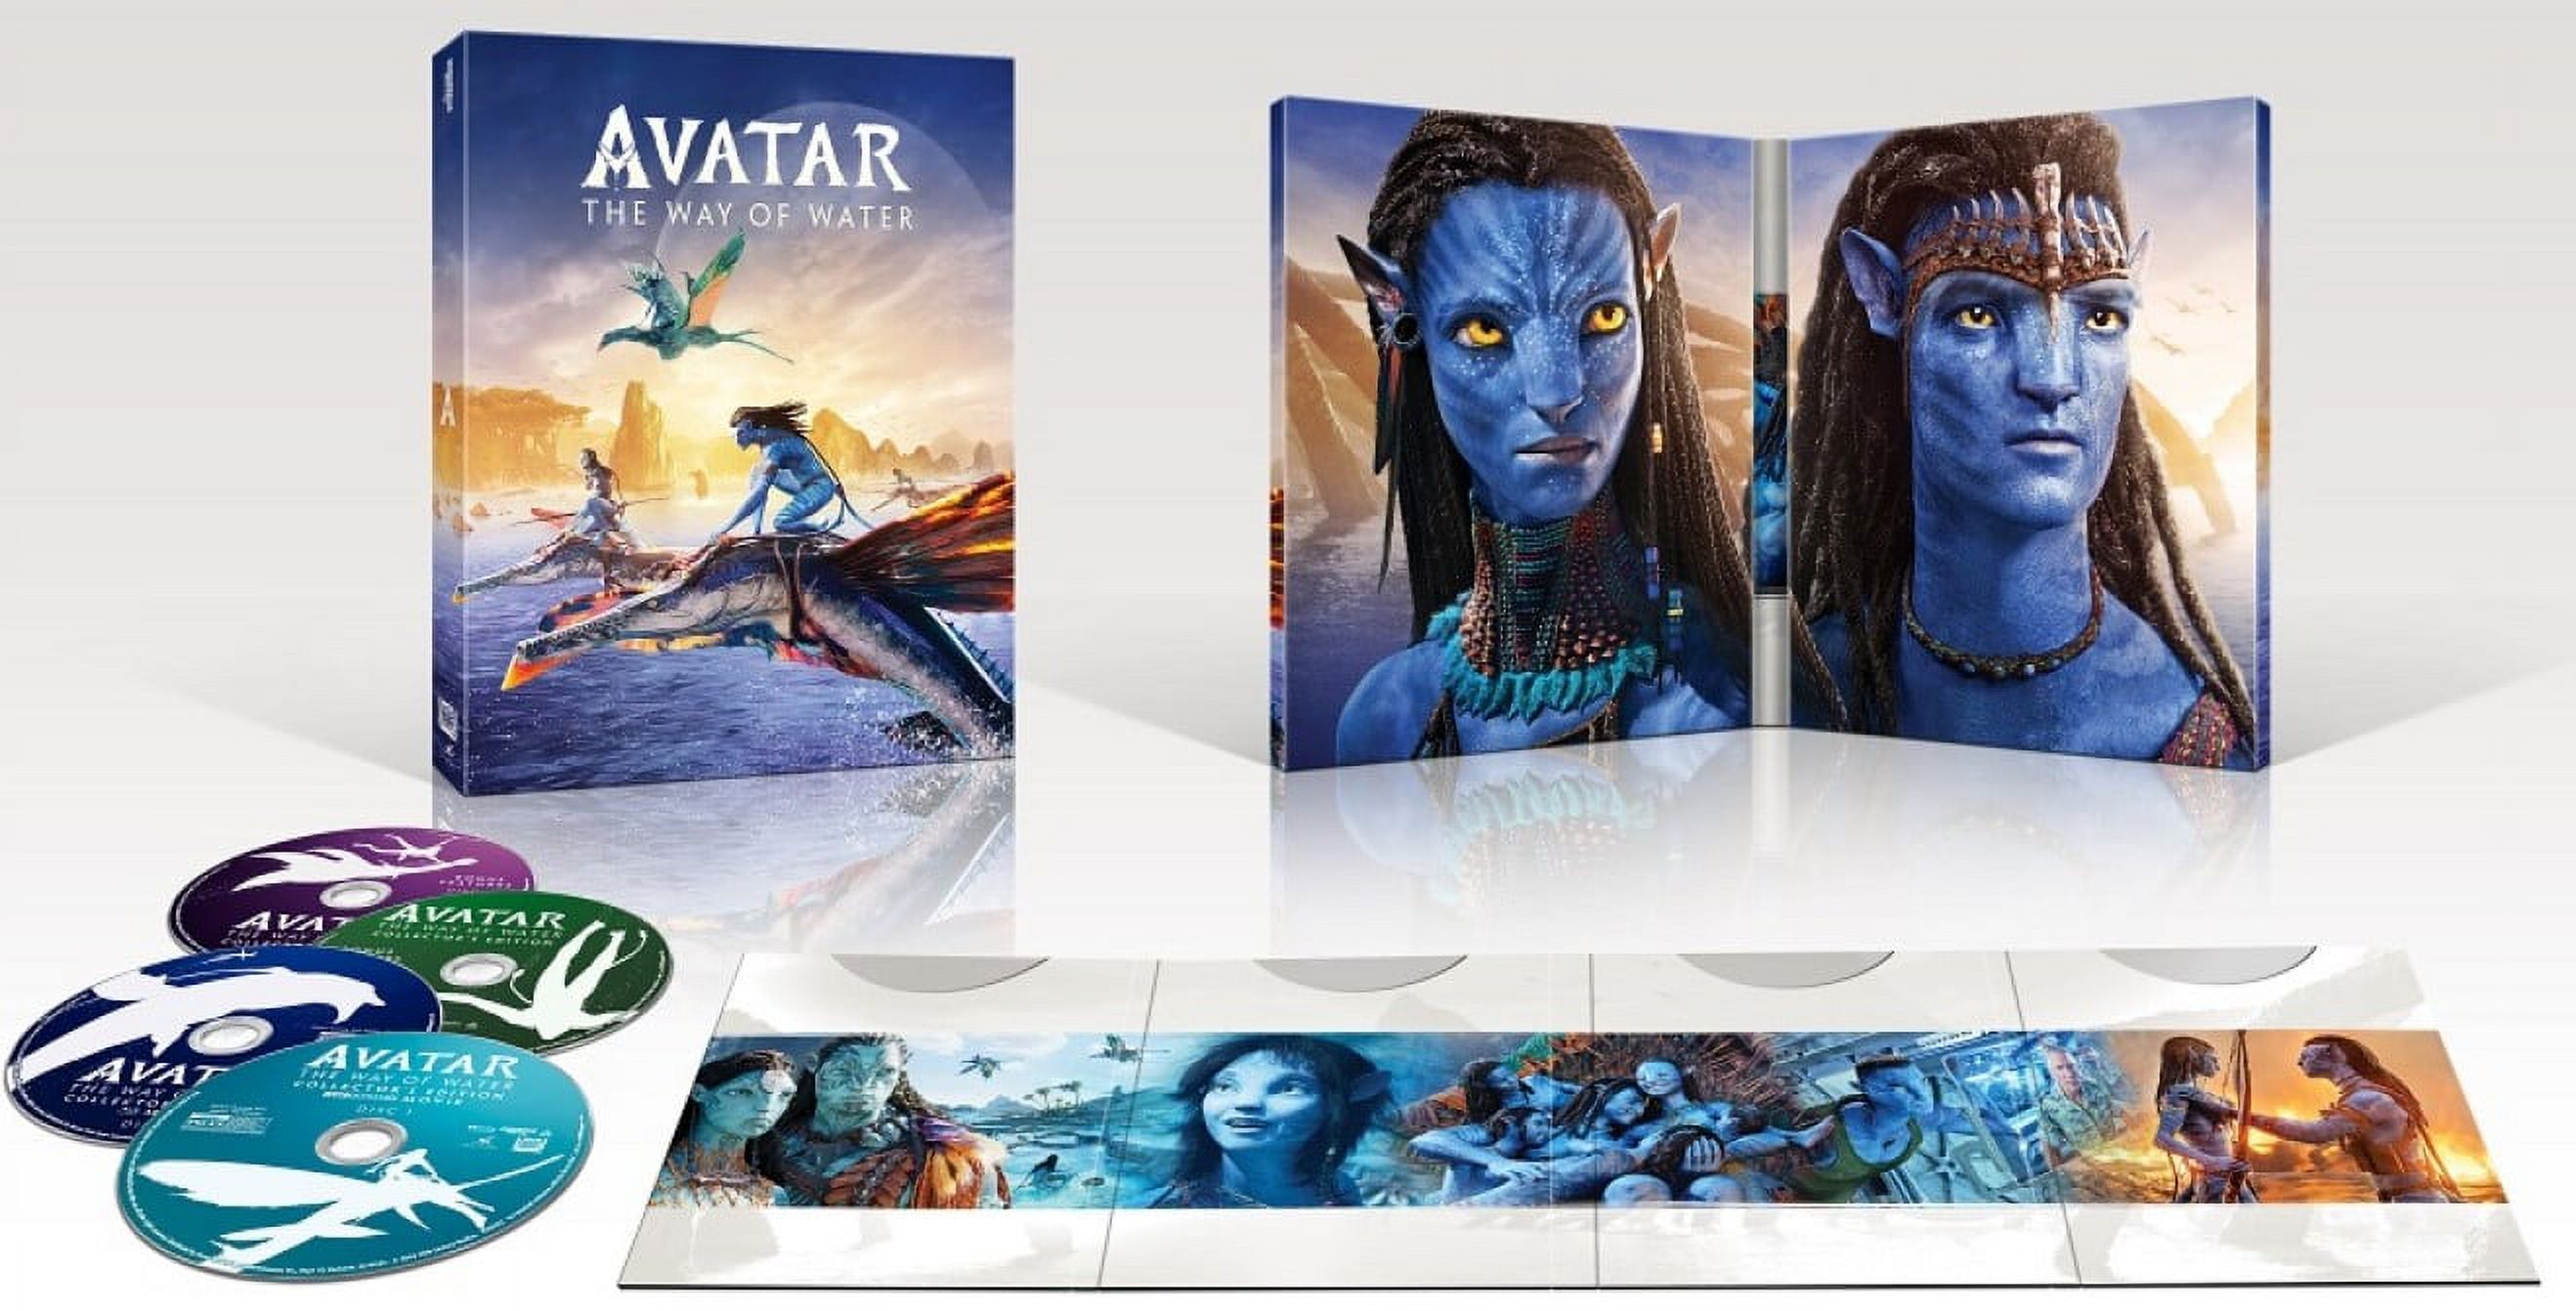 Avatar: The Way of Water 4K Collector's Edition (4K Ultra HD + Blu-ray + Digital Code) (Disney) - image 3 of 3